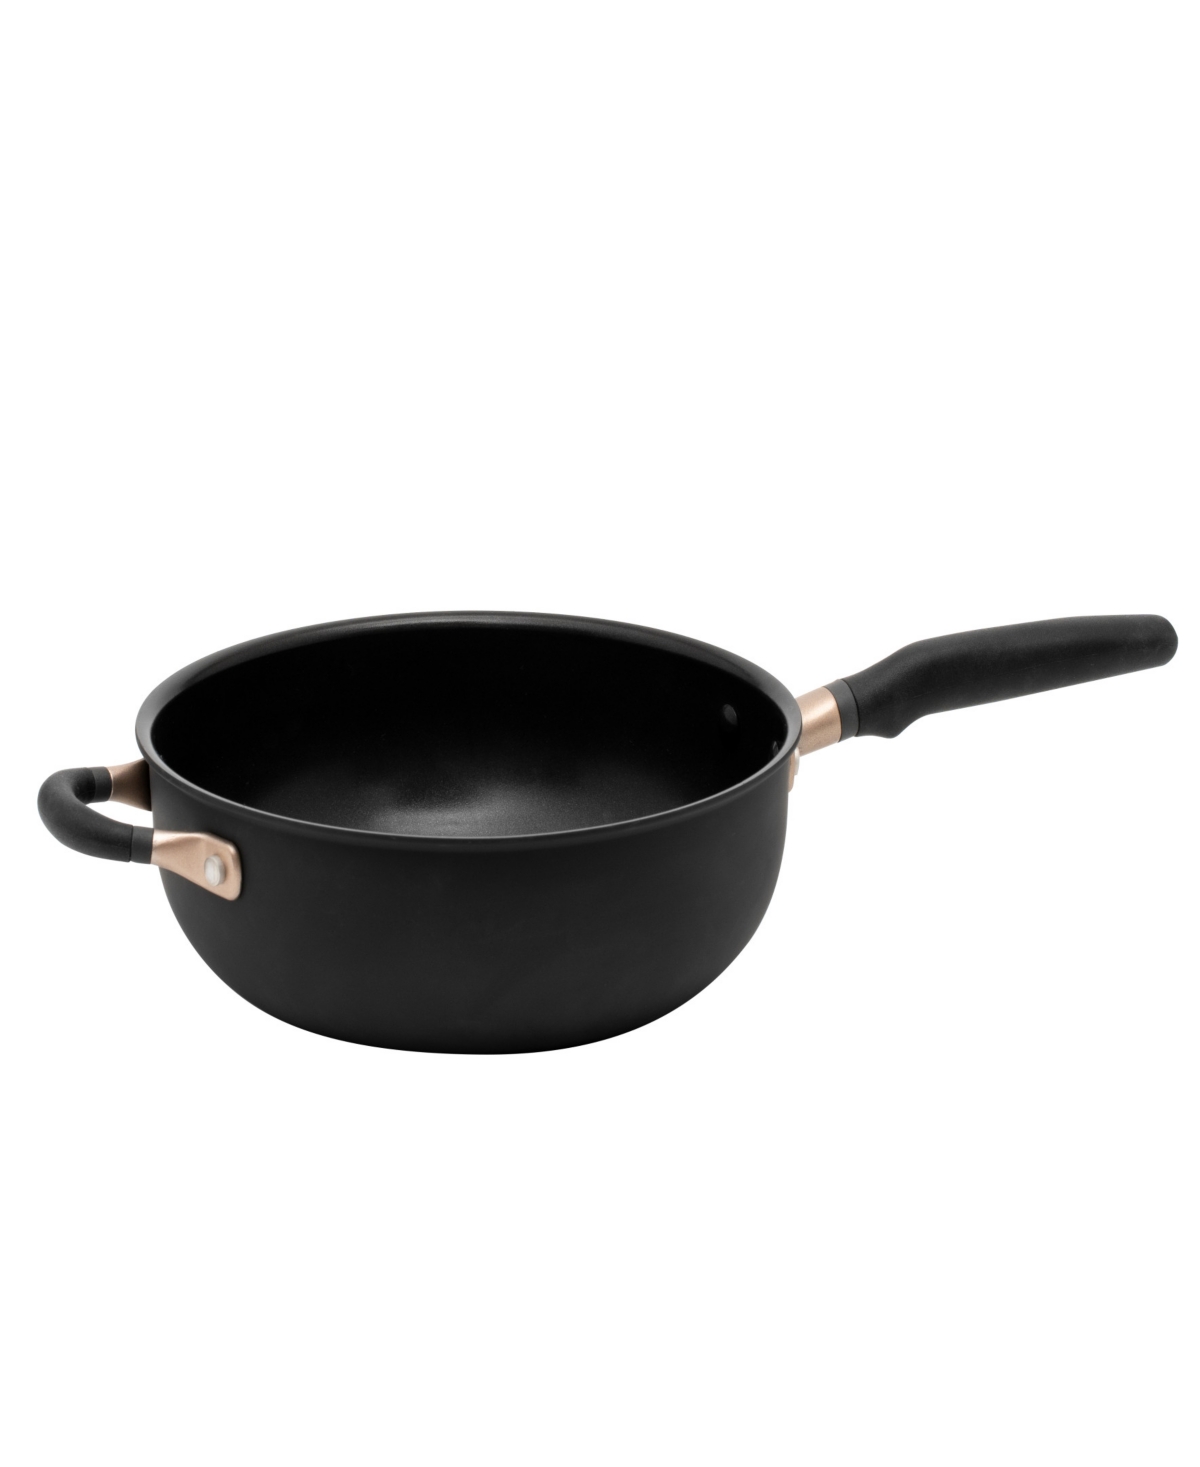 Meyer Accent Series Hard Anodized 4.5 Quart Non-stick Induction Chef Pan With Helper Handle In Matte Black